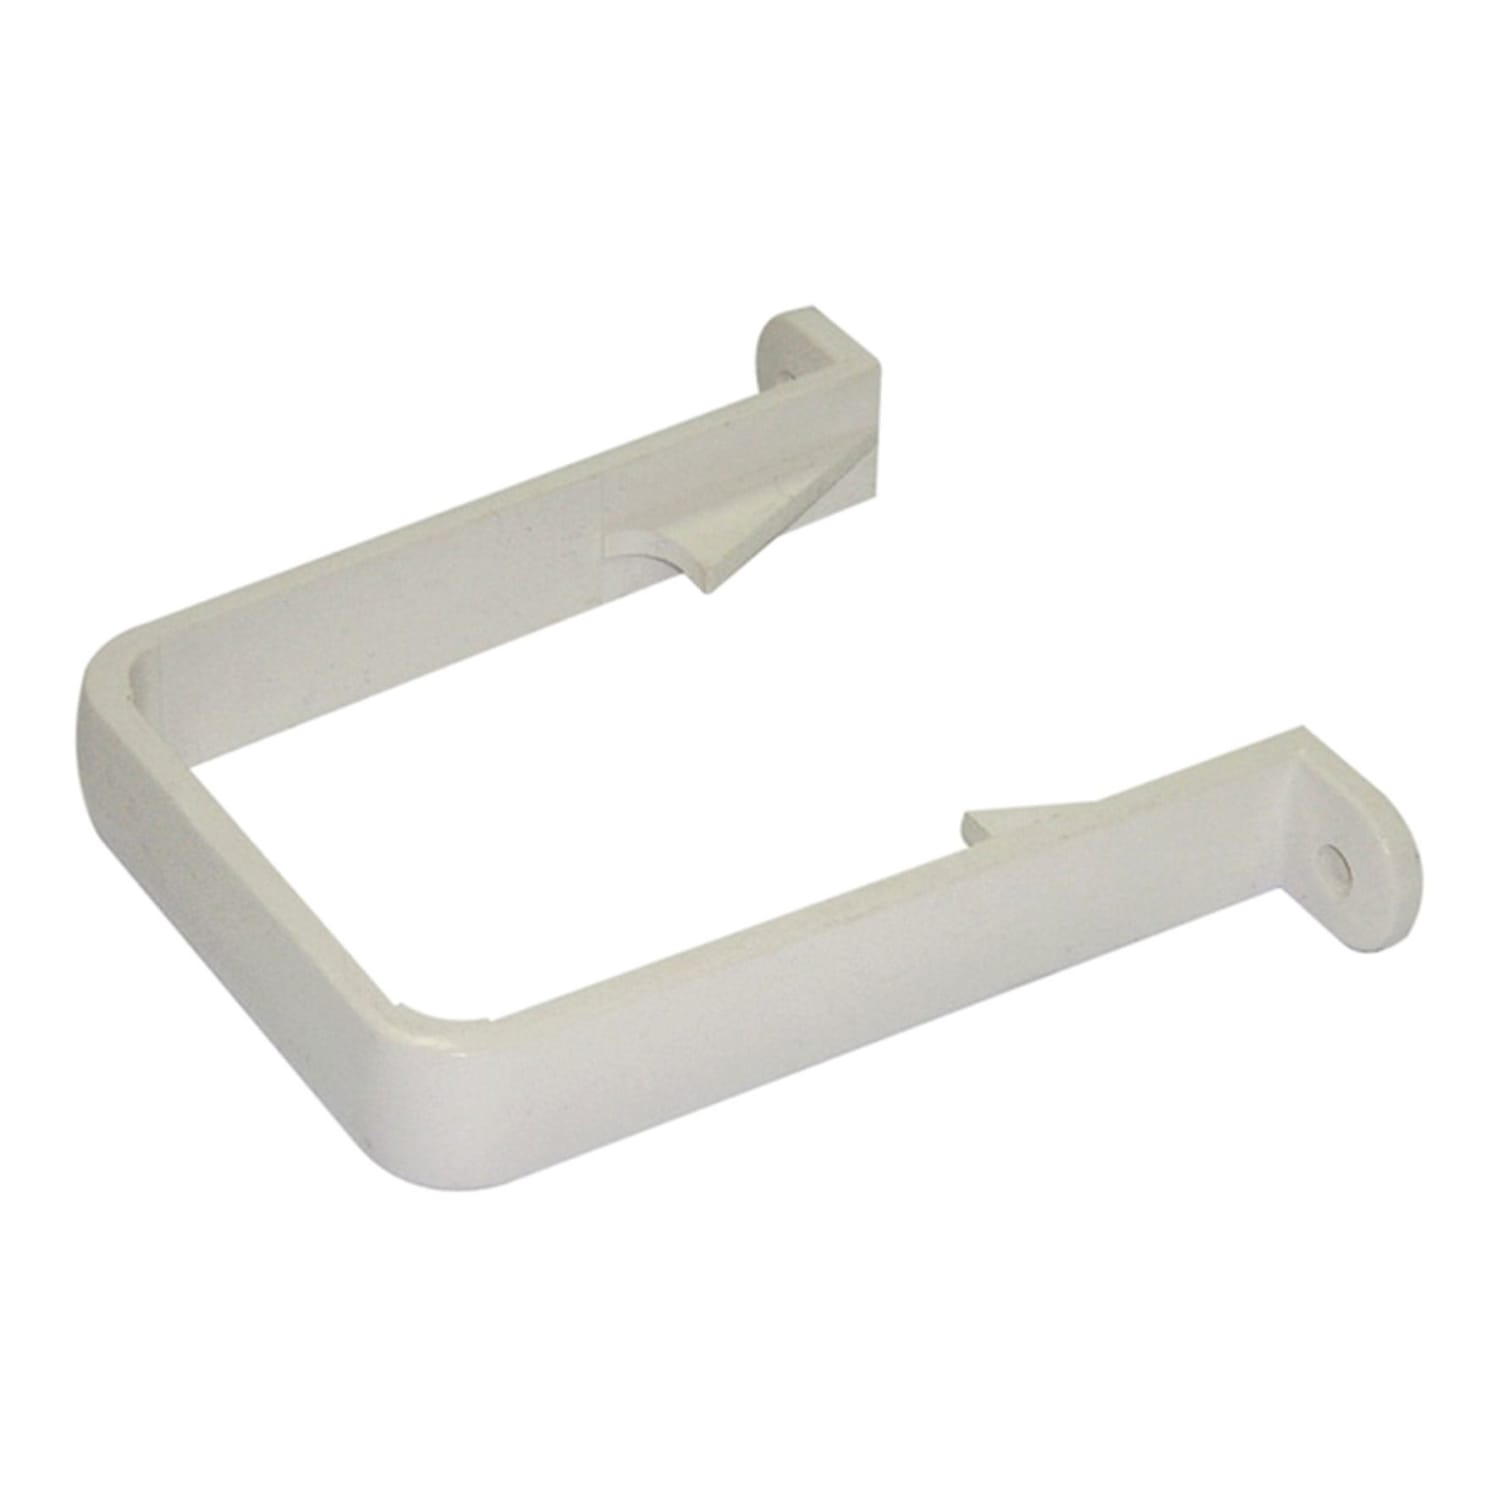 White Standard Square 65mm Down Pipe Stand Off Clip Fits Most Square downpipes Pack of 3 x RWSC1W 